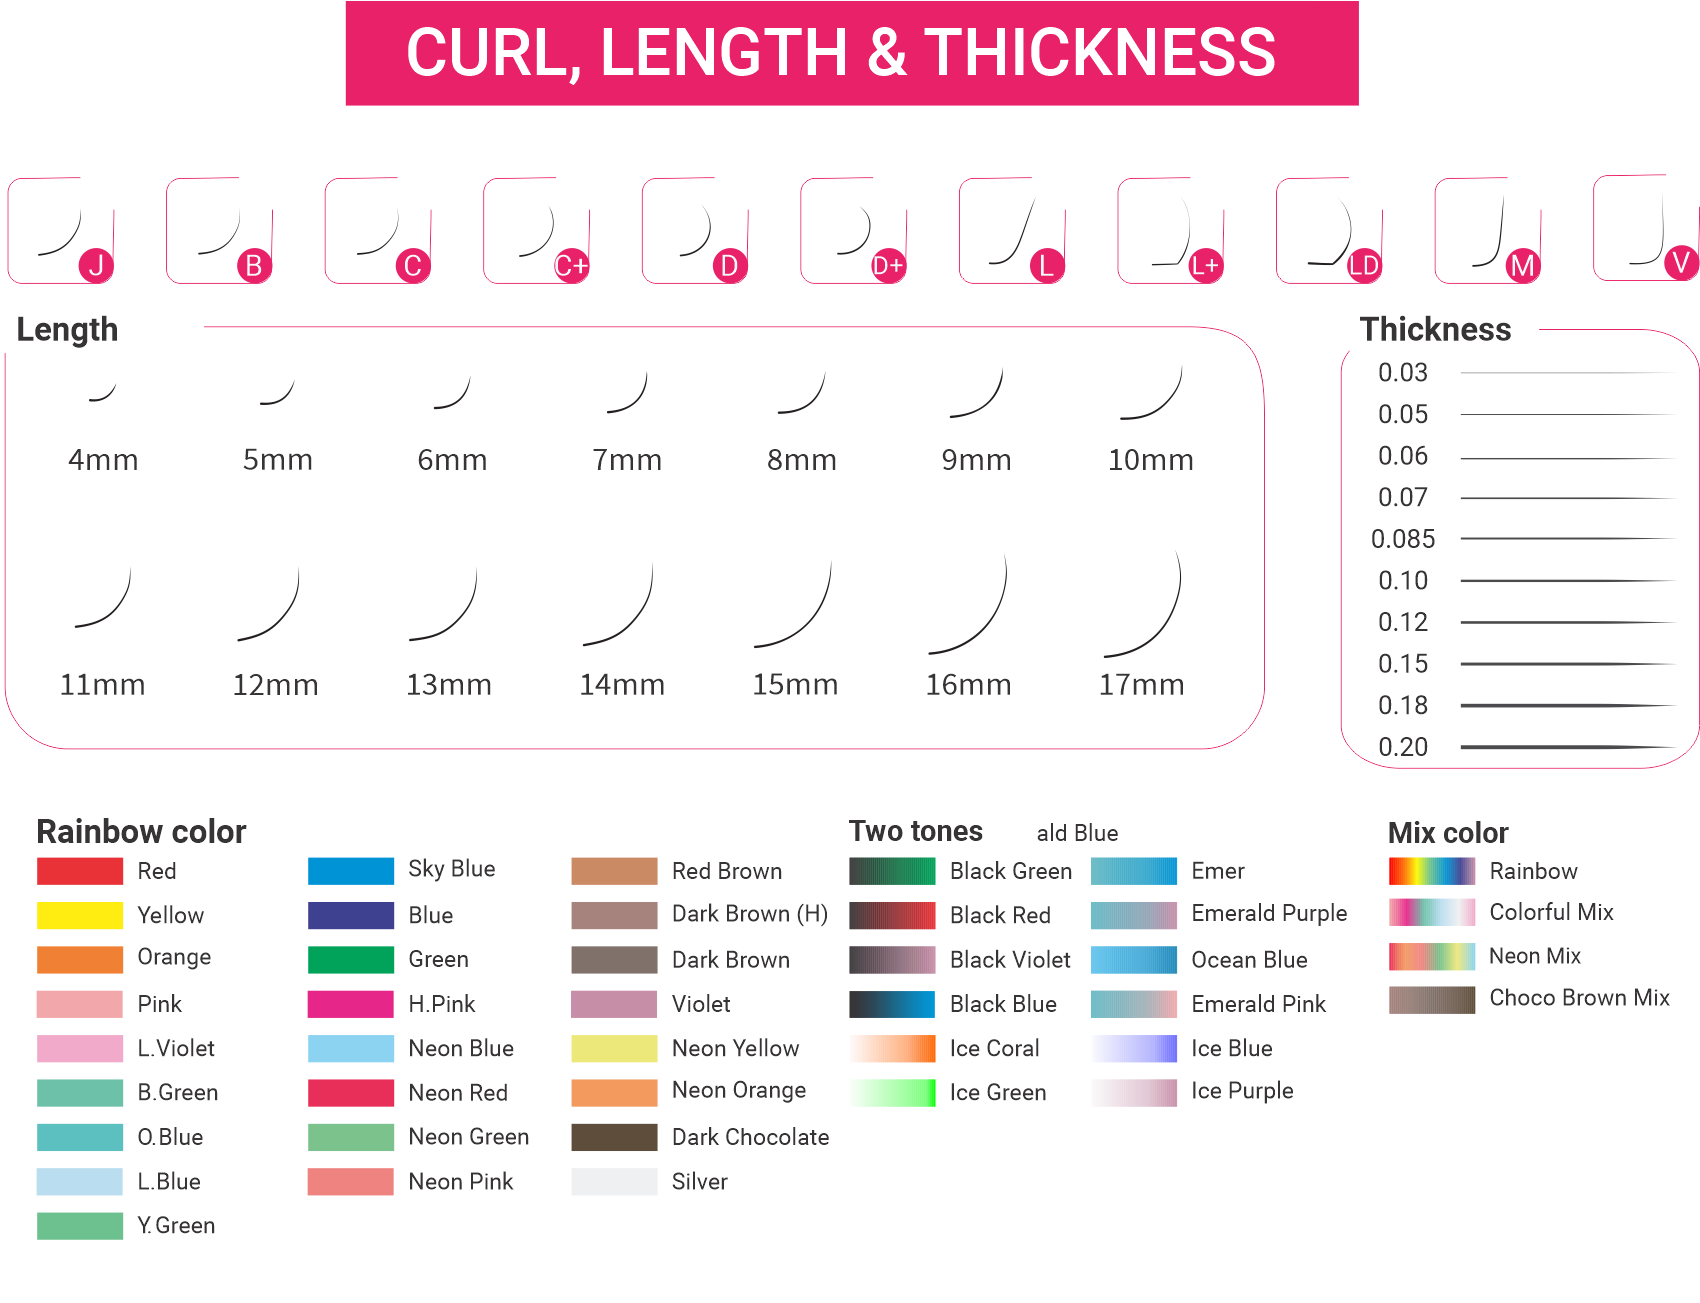 Table displaying a wide range of customization options, including curls, lengths, and colors for a variety of lash styles